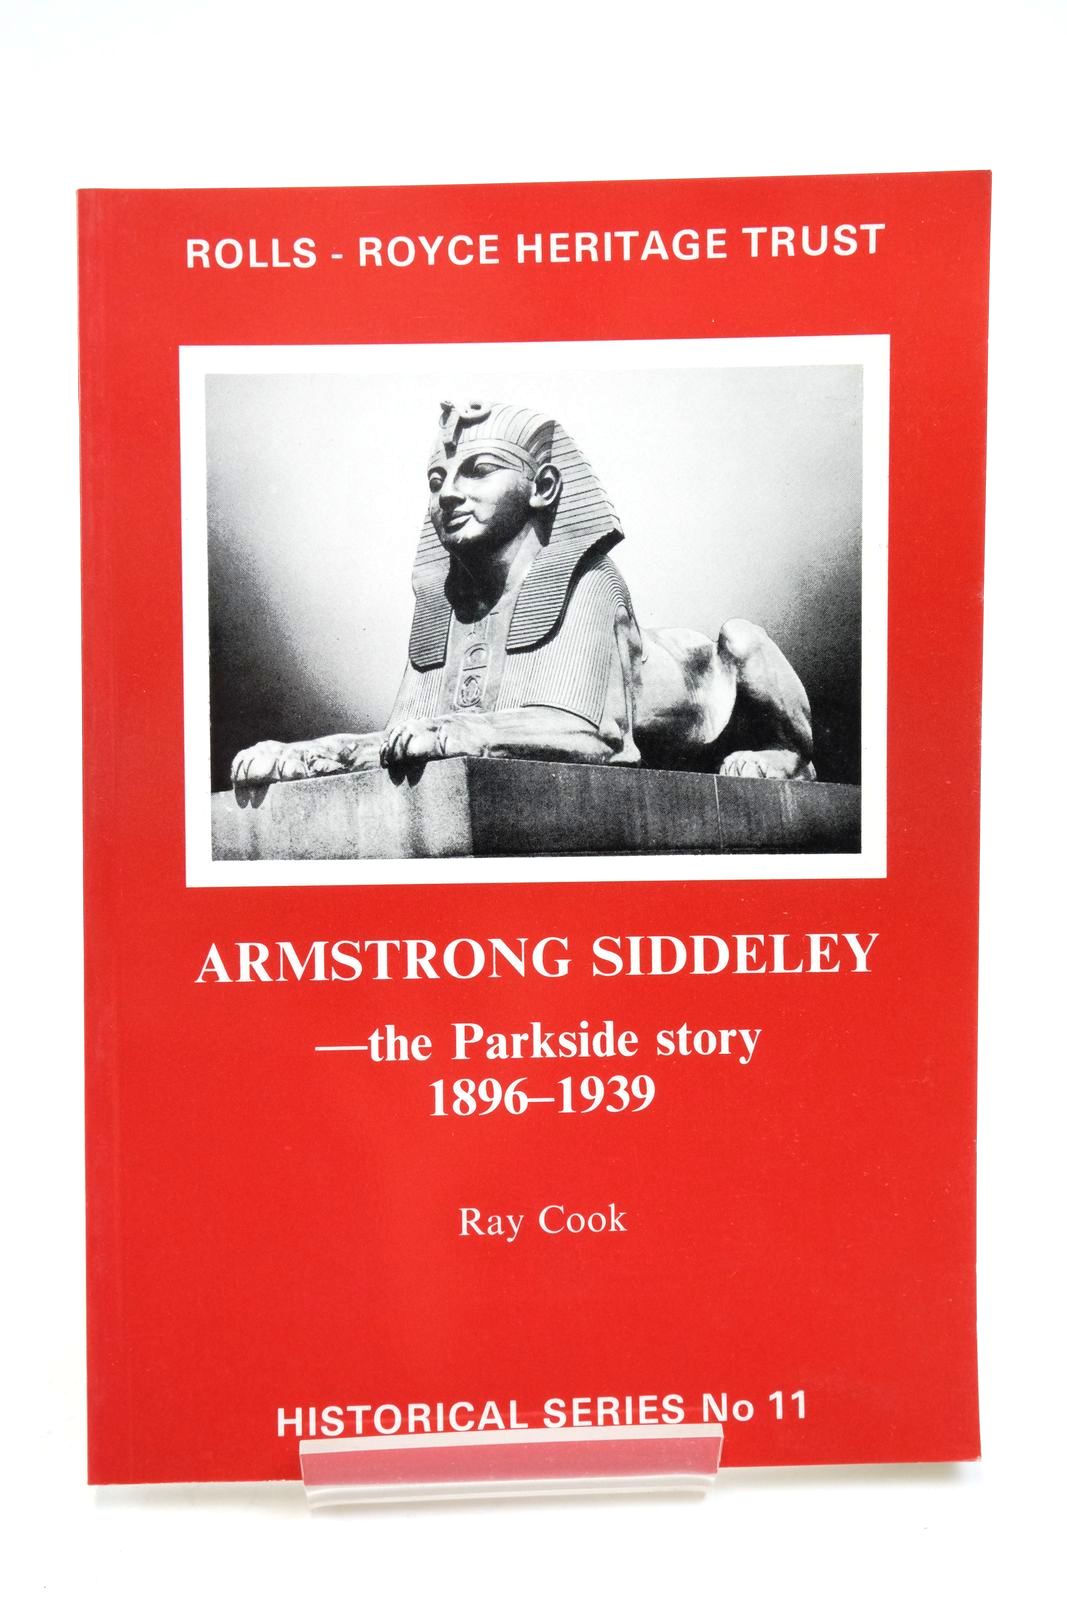 Photo of ARMSTRONG SIDDELEY - THE PARKSIDE STORY 1896-1939 written by Cook, Ray published by Rolls-Royce Heritage Trust (STOCK CODE: 2138568)  for sale by Stella & Rose's Books